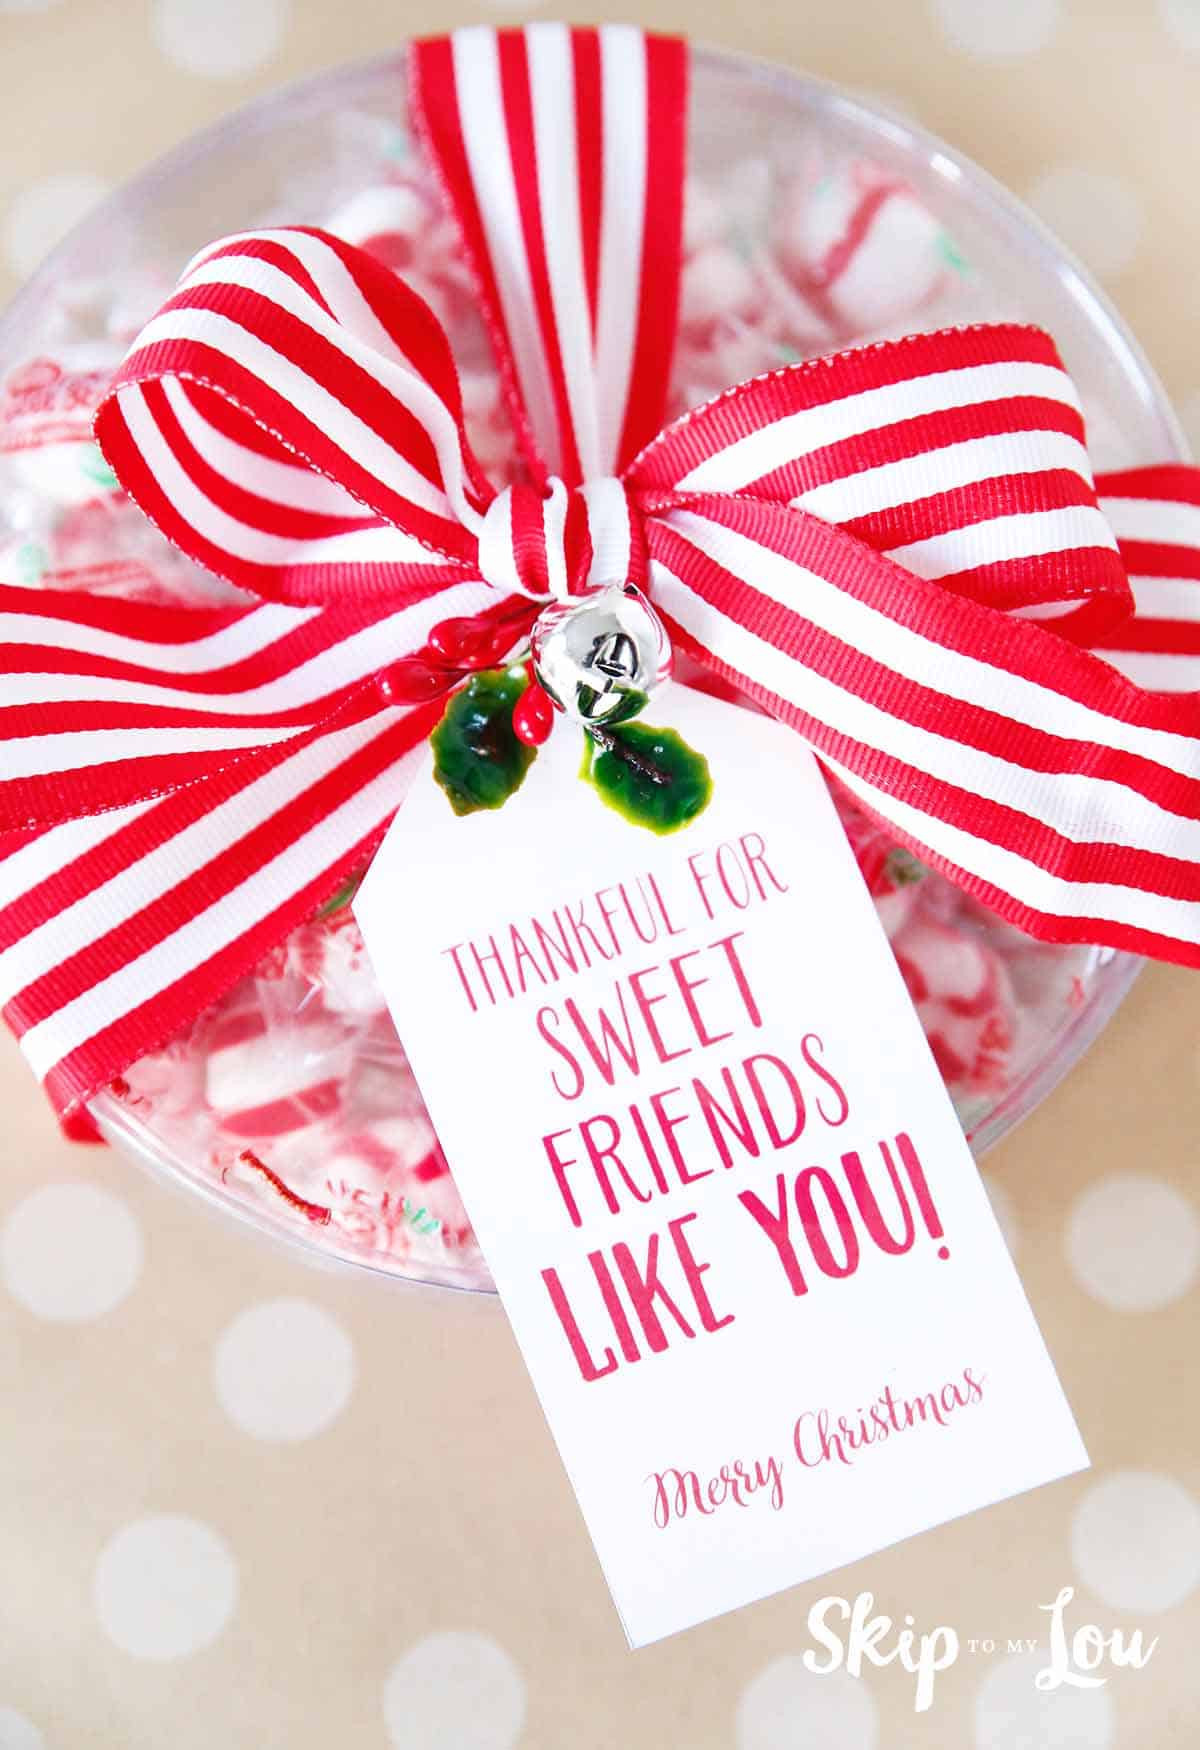 Cute Christmas Candy Ideas
 25 Easy Christmas Gift Ideas that are super cute